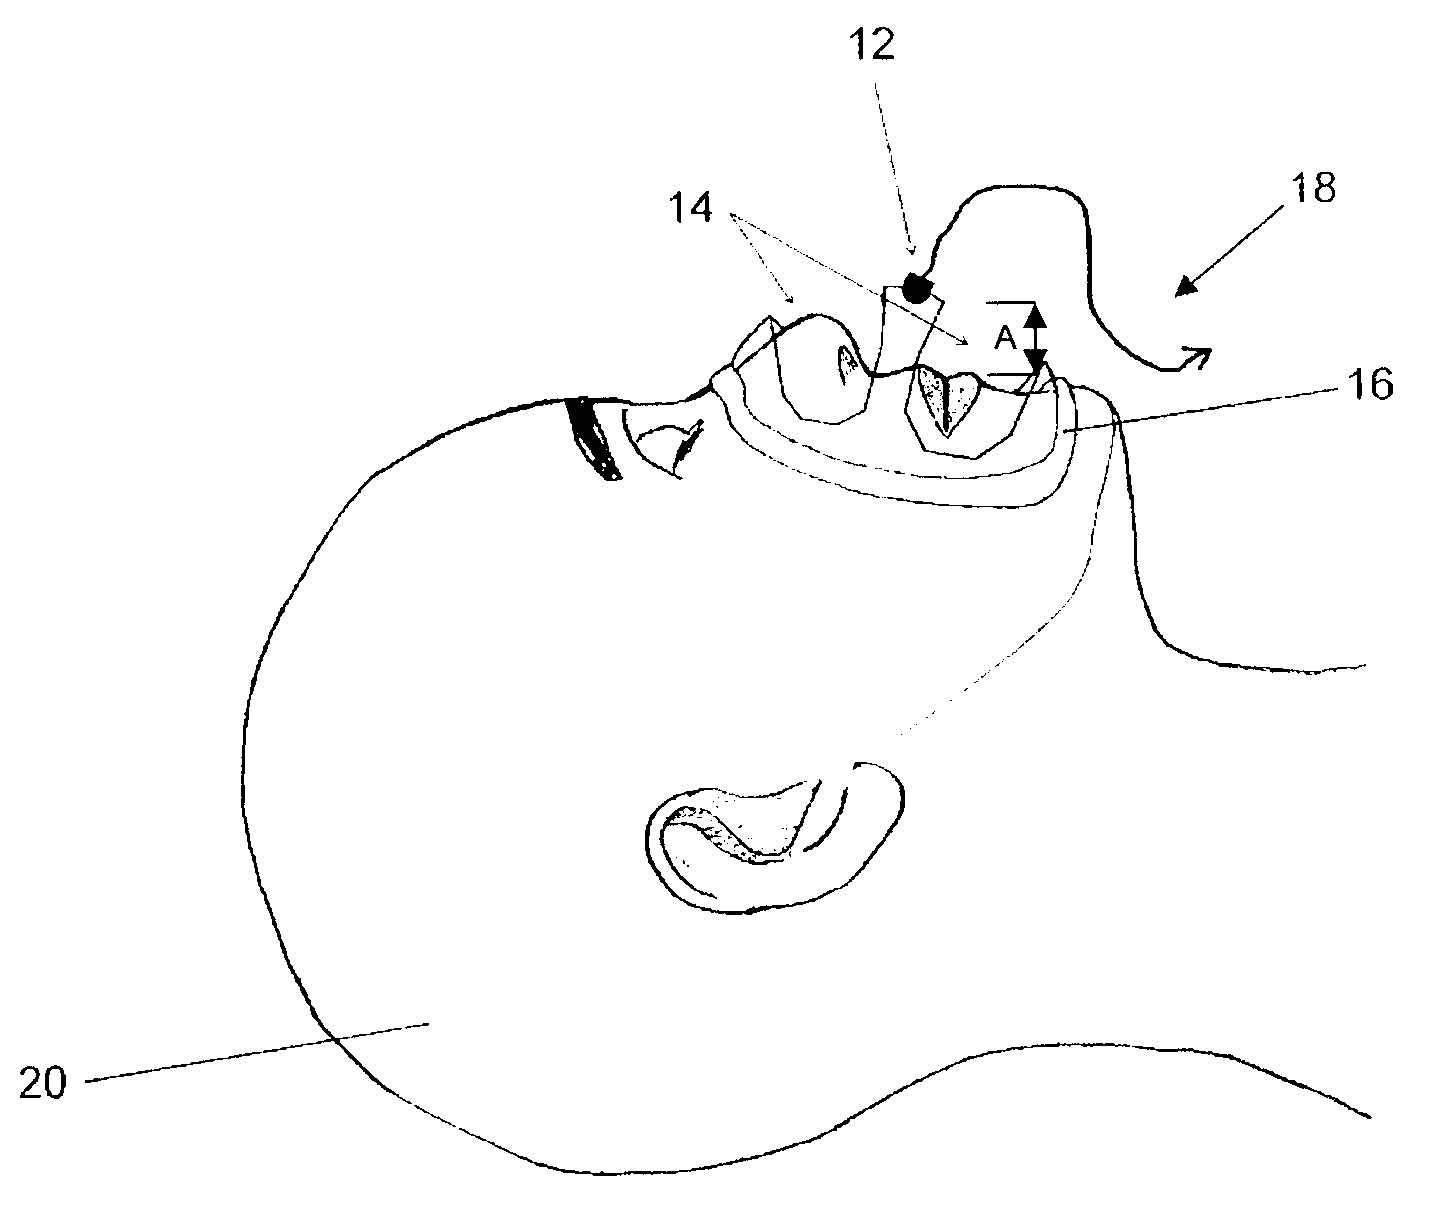 Method and apparatus for monitoring breathing cycle by frequency analysis of an acoustic data stream